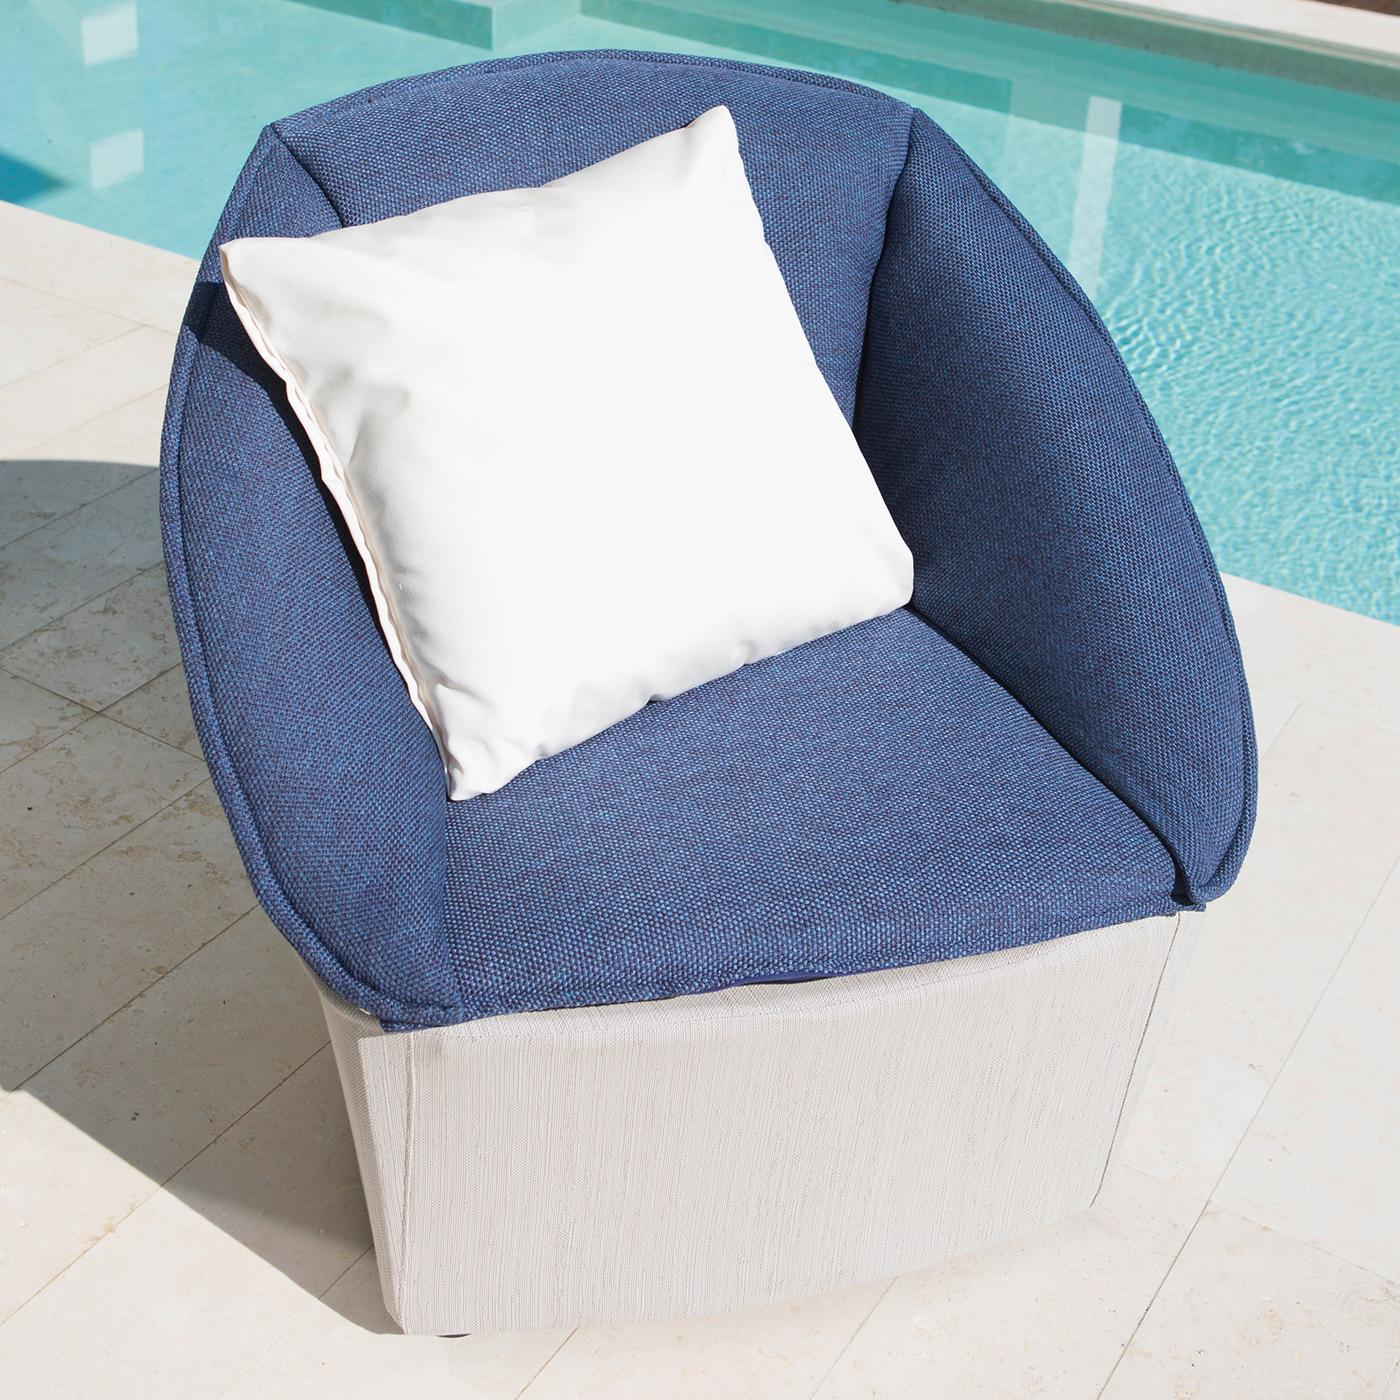 Inspired by the comfort of indoor upholstered furniture, this armchair is an elegant accent to a cozy outdoor living space. Combining high-tech materials with refined fabrics, it comprises a steel structure covered with batyline, and a soft,